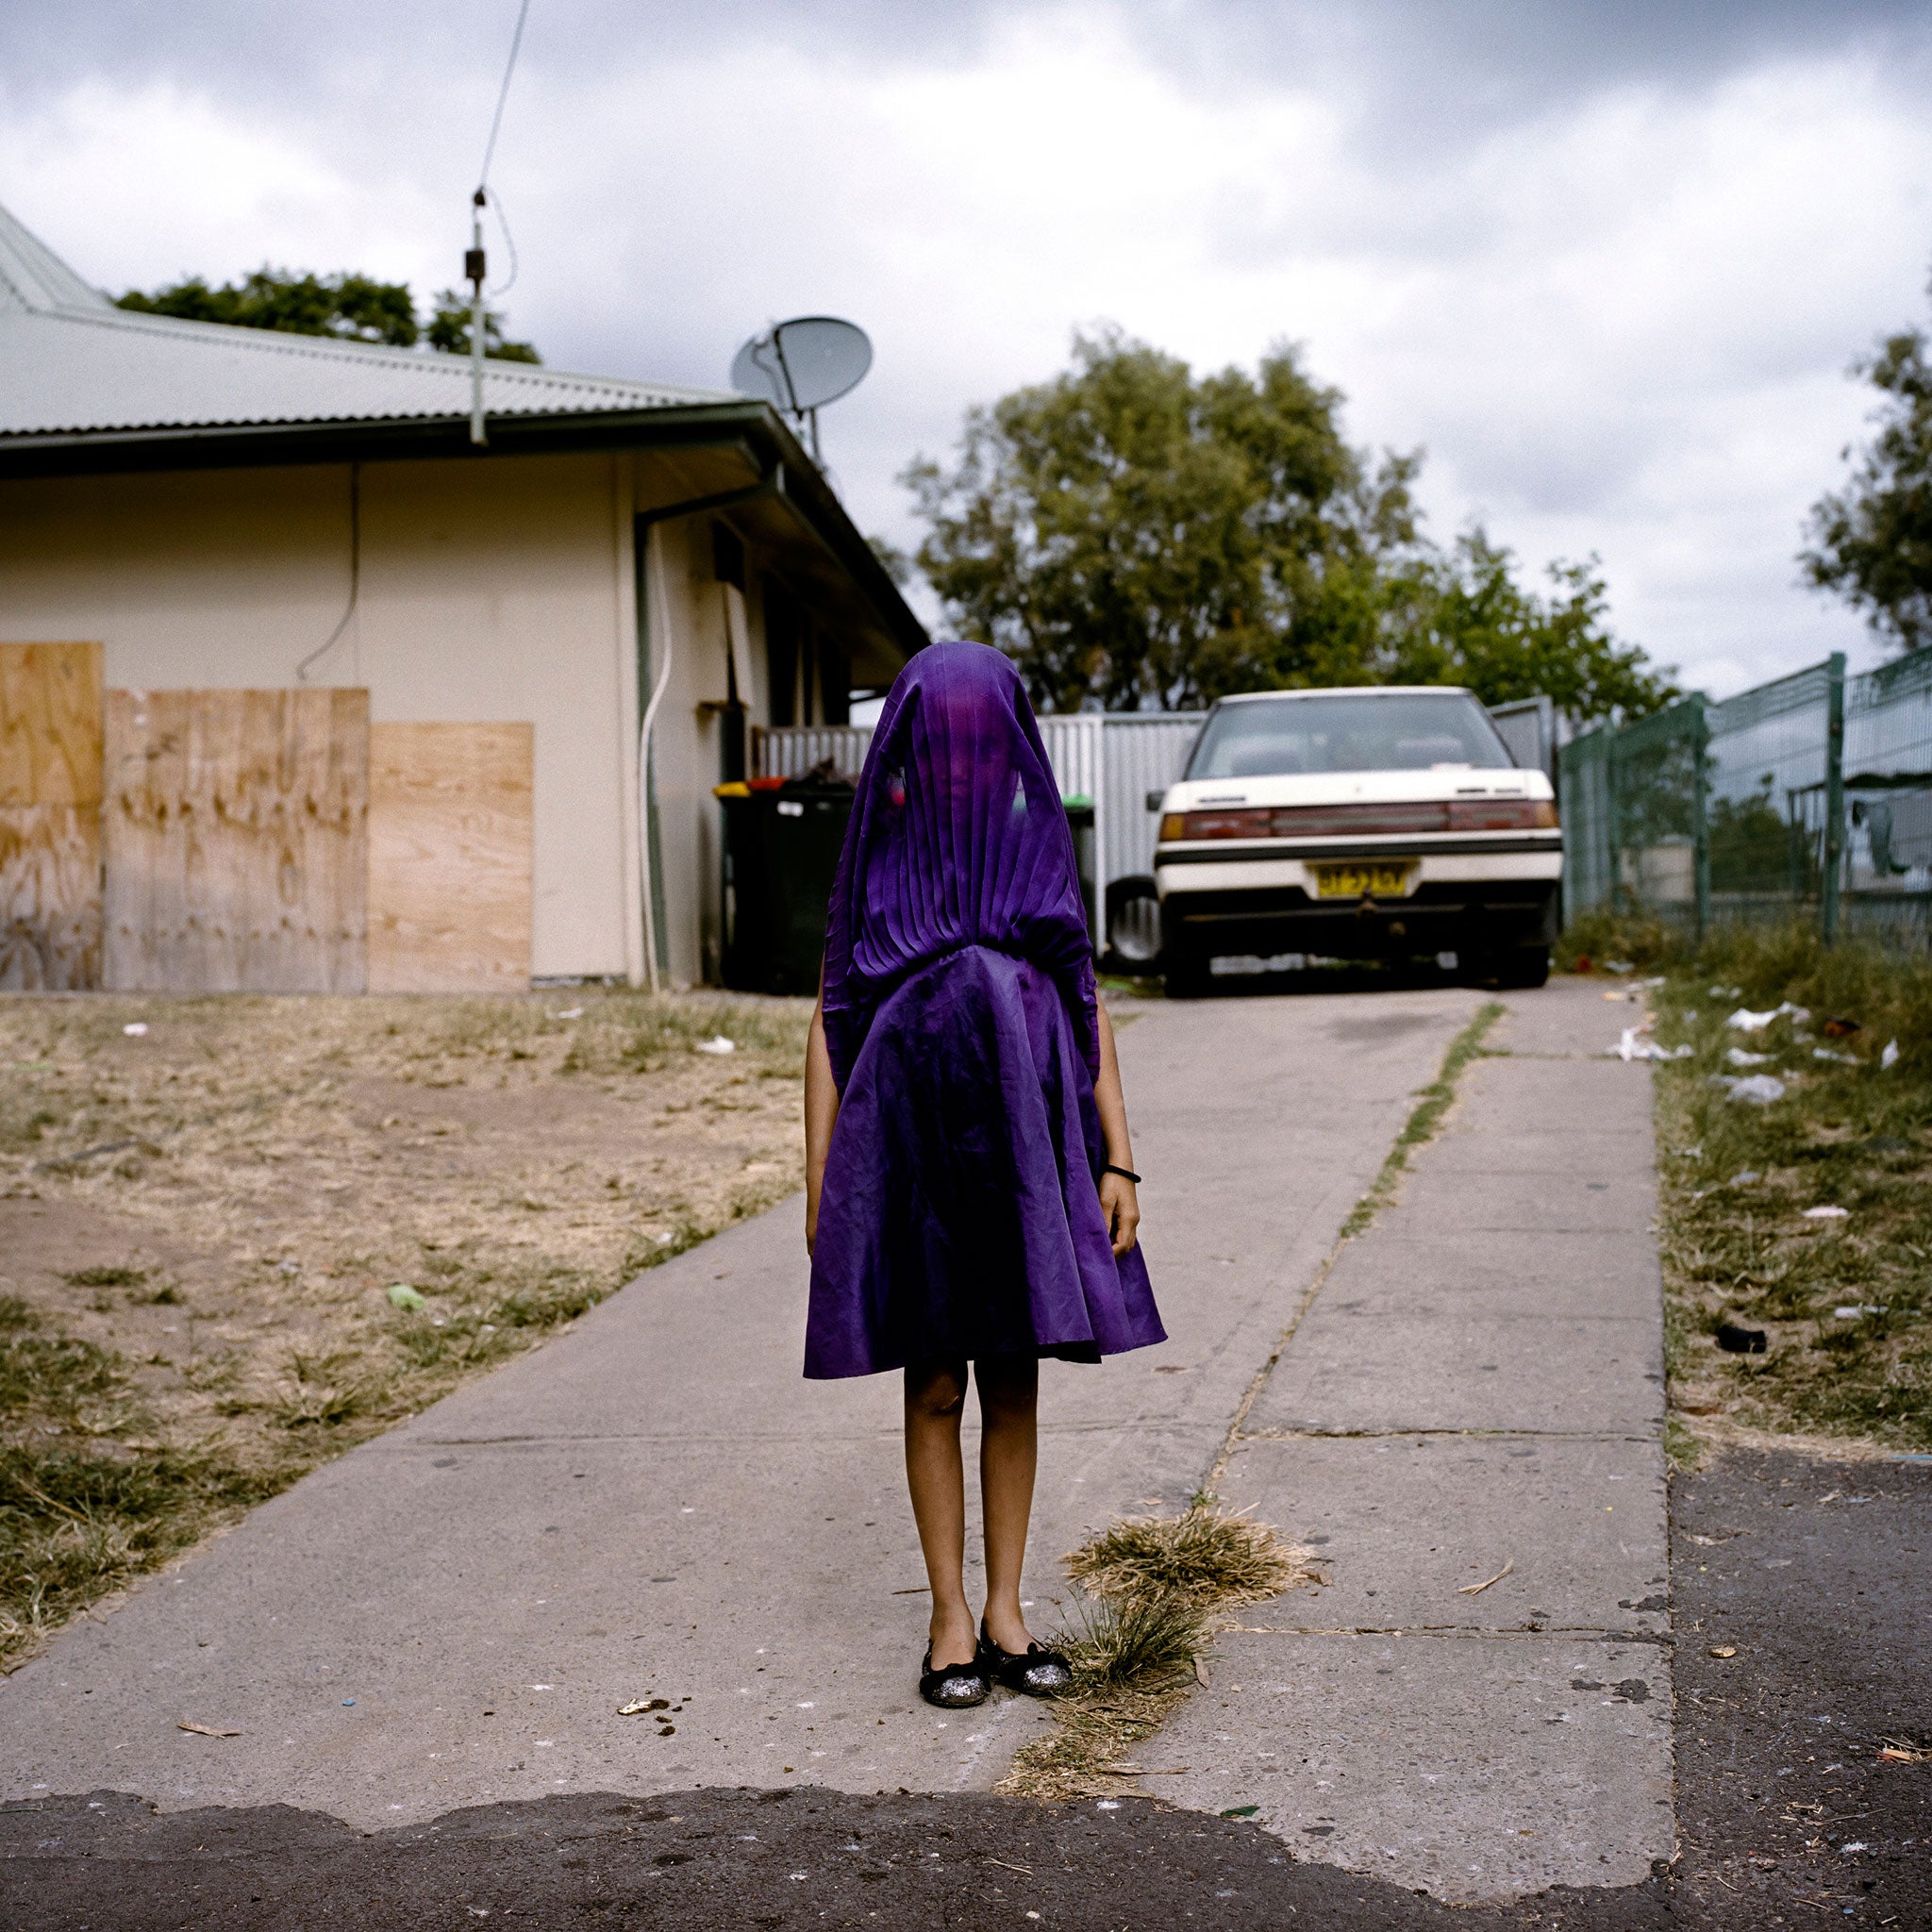 Portrait winner: Laurinda waiting in her purple dress for the bus that will take her to Sunday School in Australia